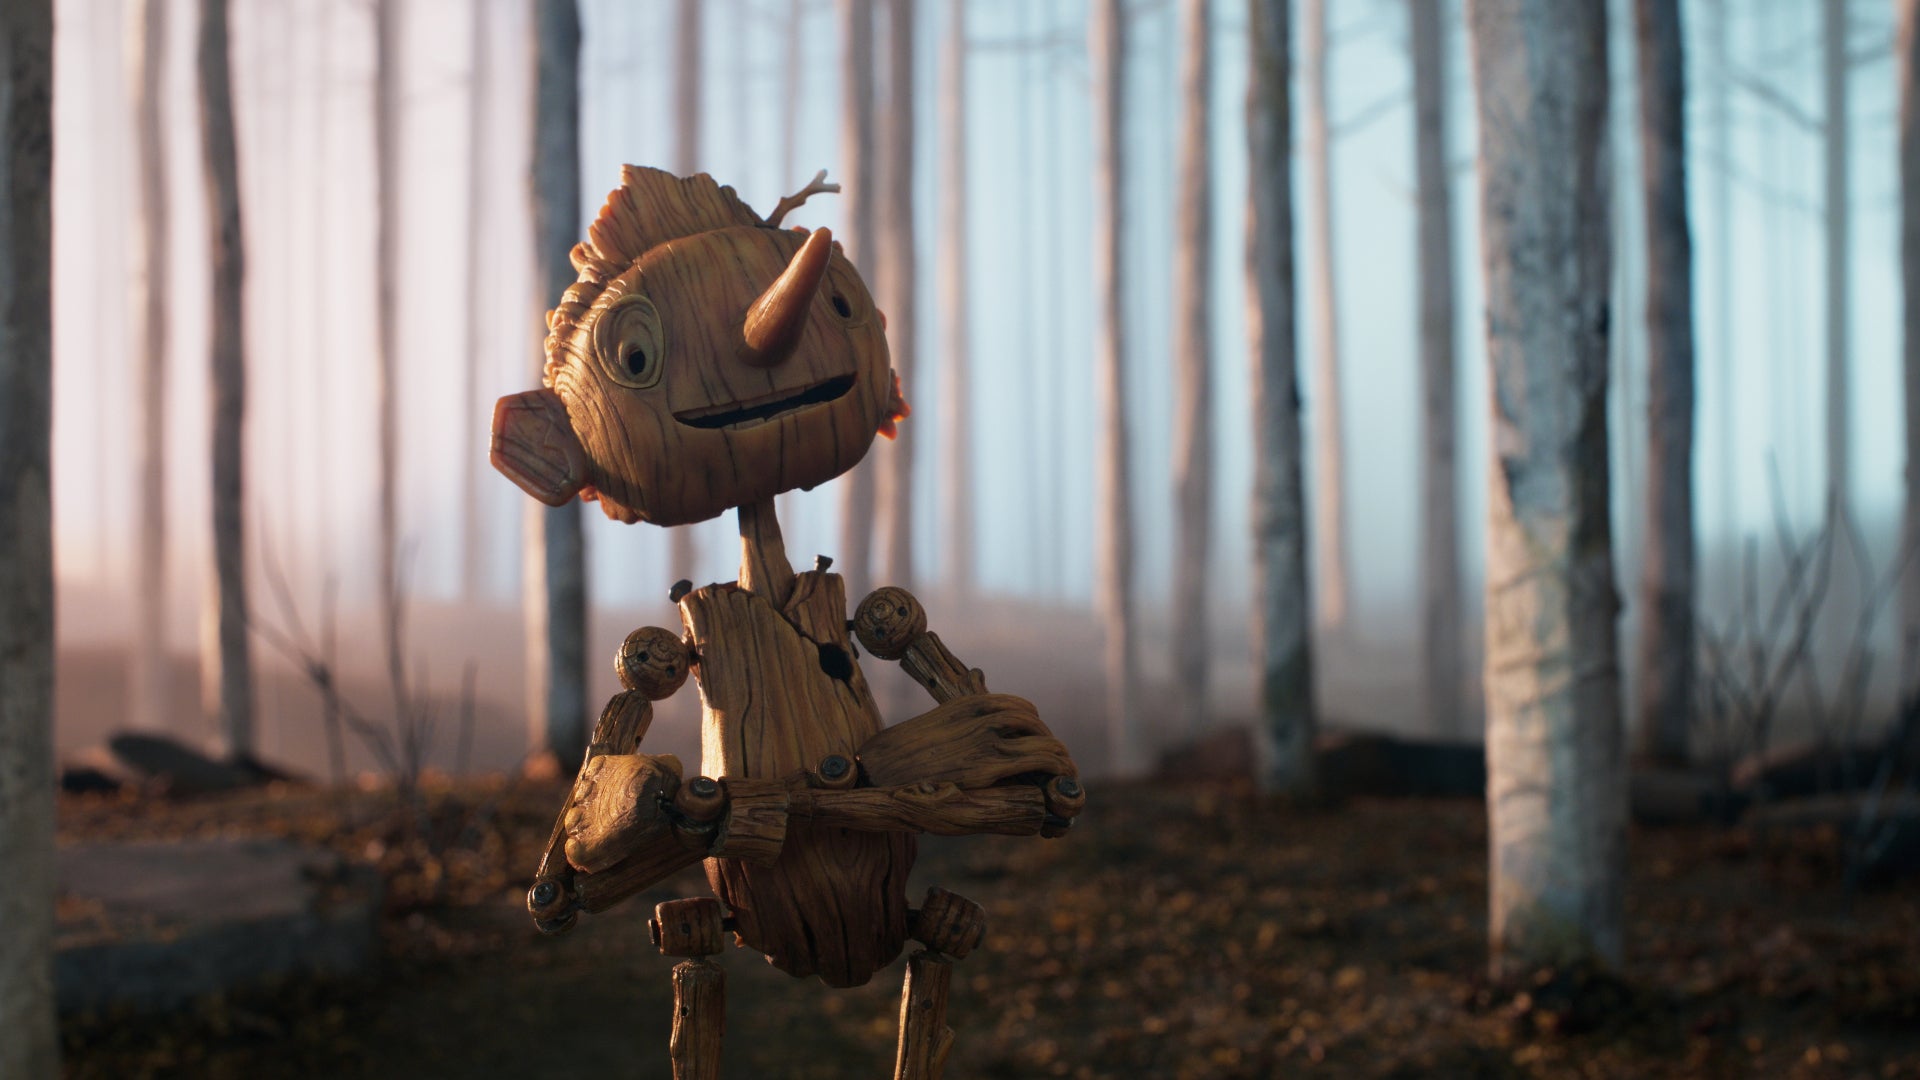 Guillermo del Toro Gives New Life To The Classic Fairy Tale ‘Pinocchio’ – Review